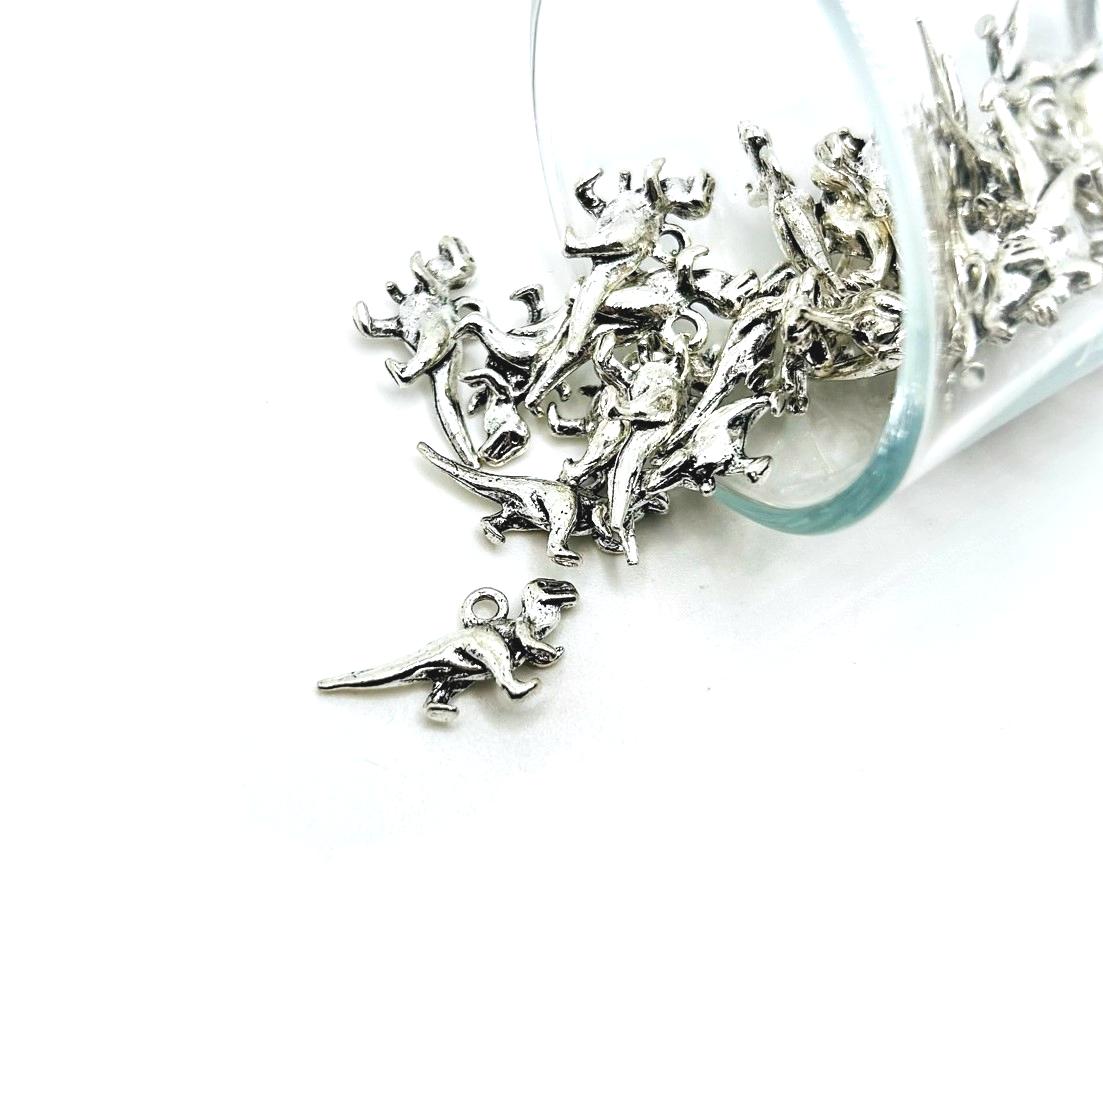 4, 20 or 50 Pieces: Silver T-Rex Dinosaur 3D Charms